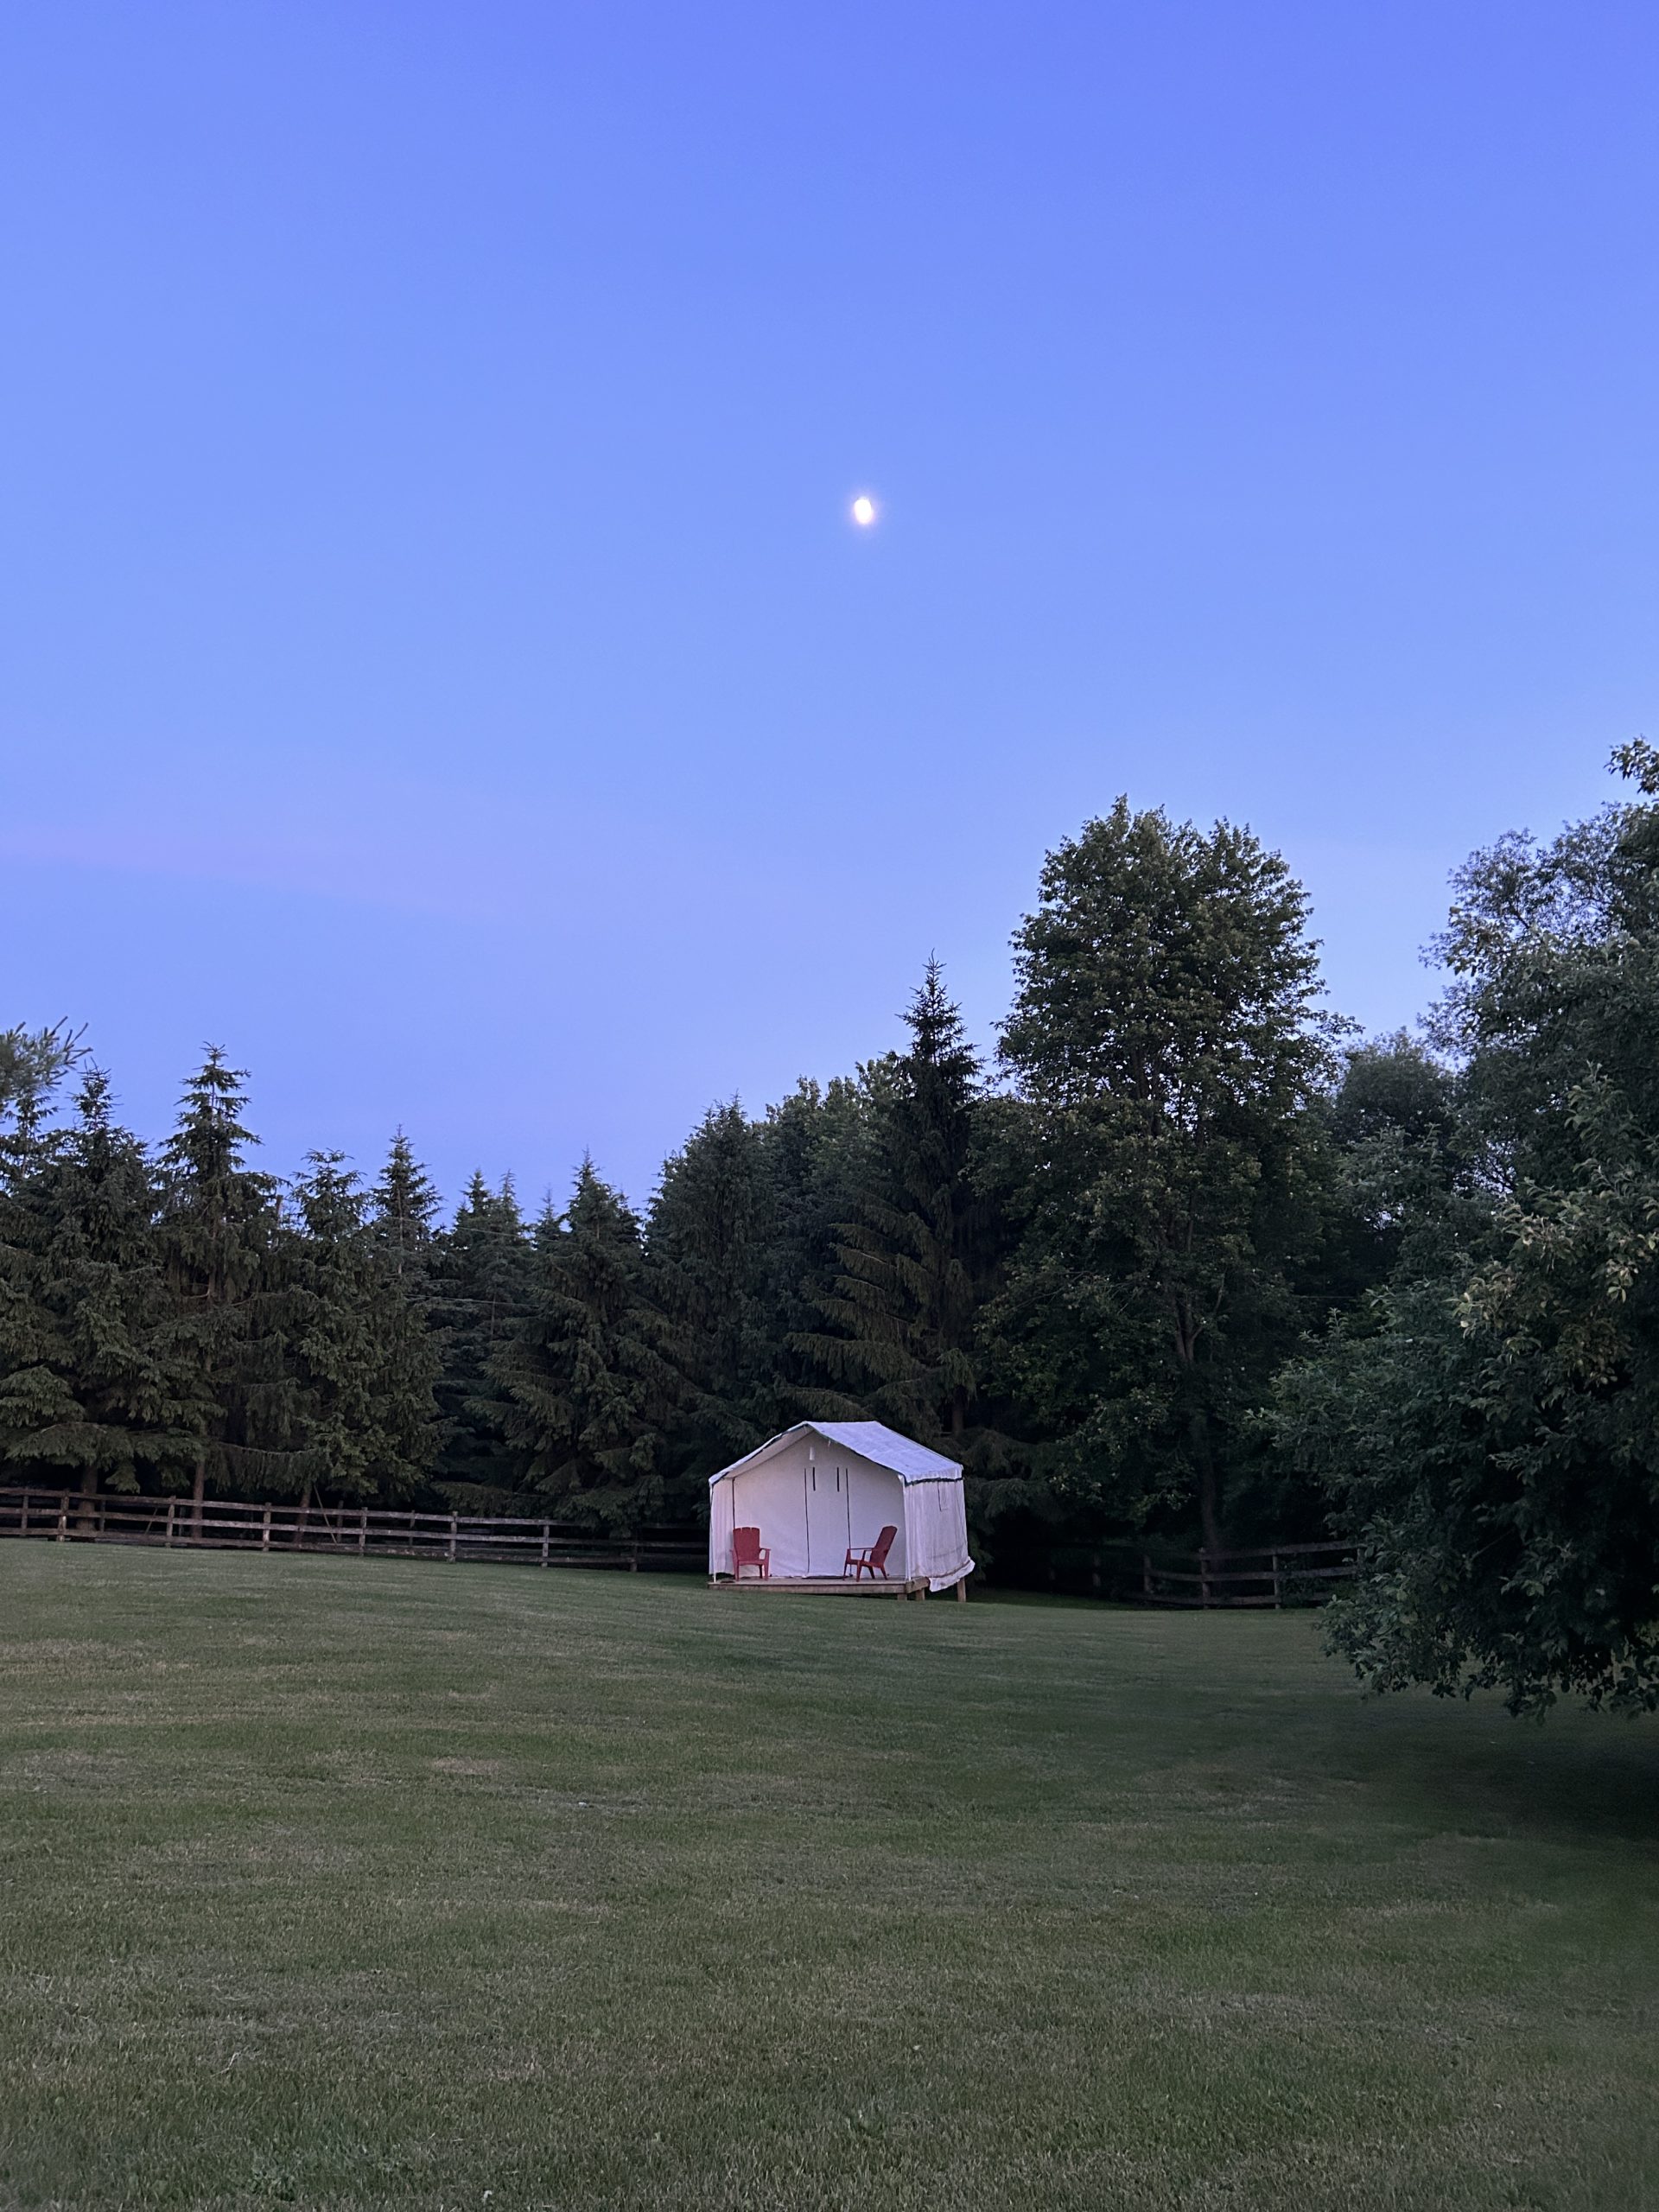 Full moon over The Gorge tent at Irvineside Farm.